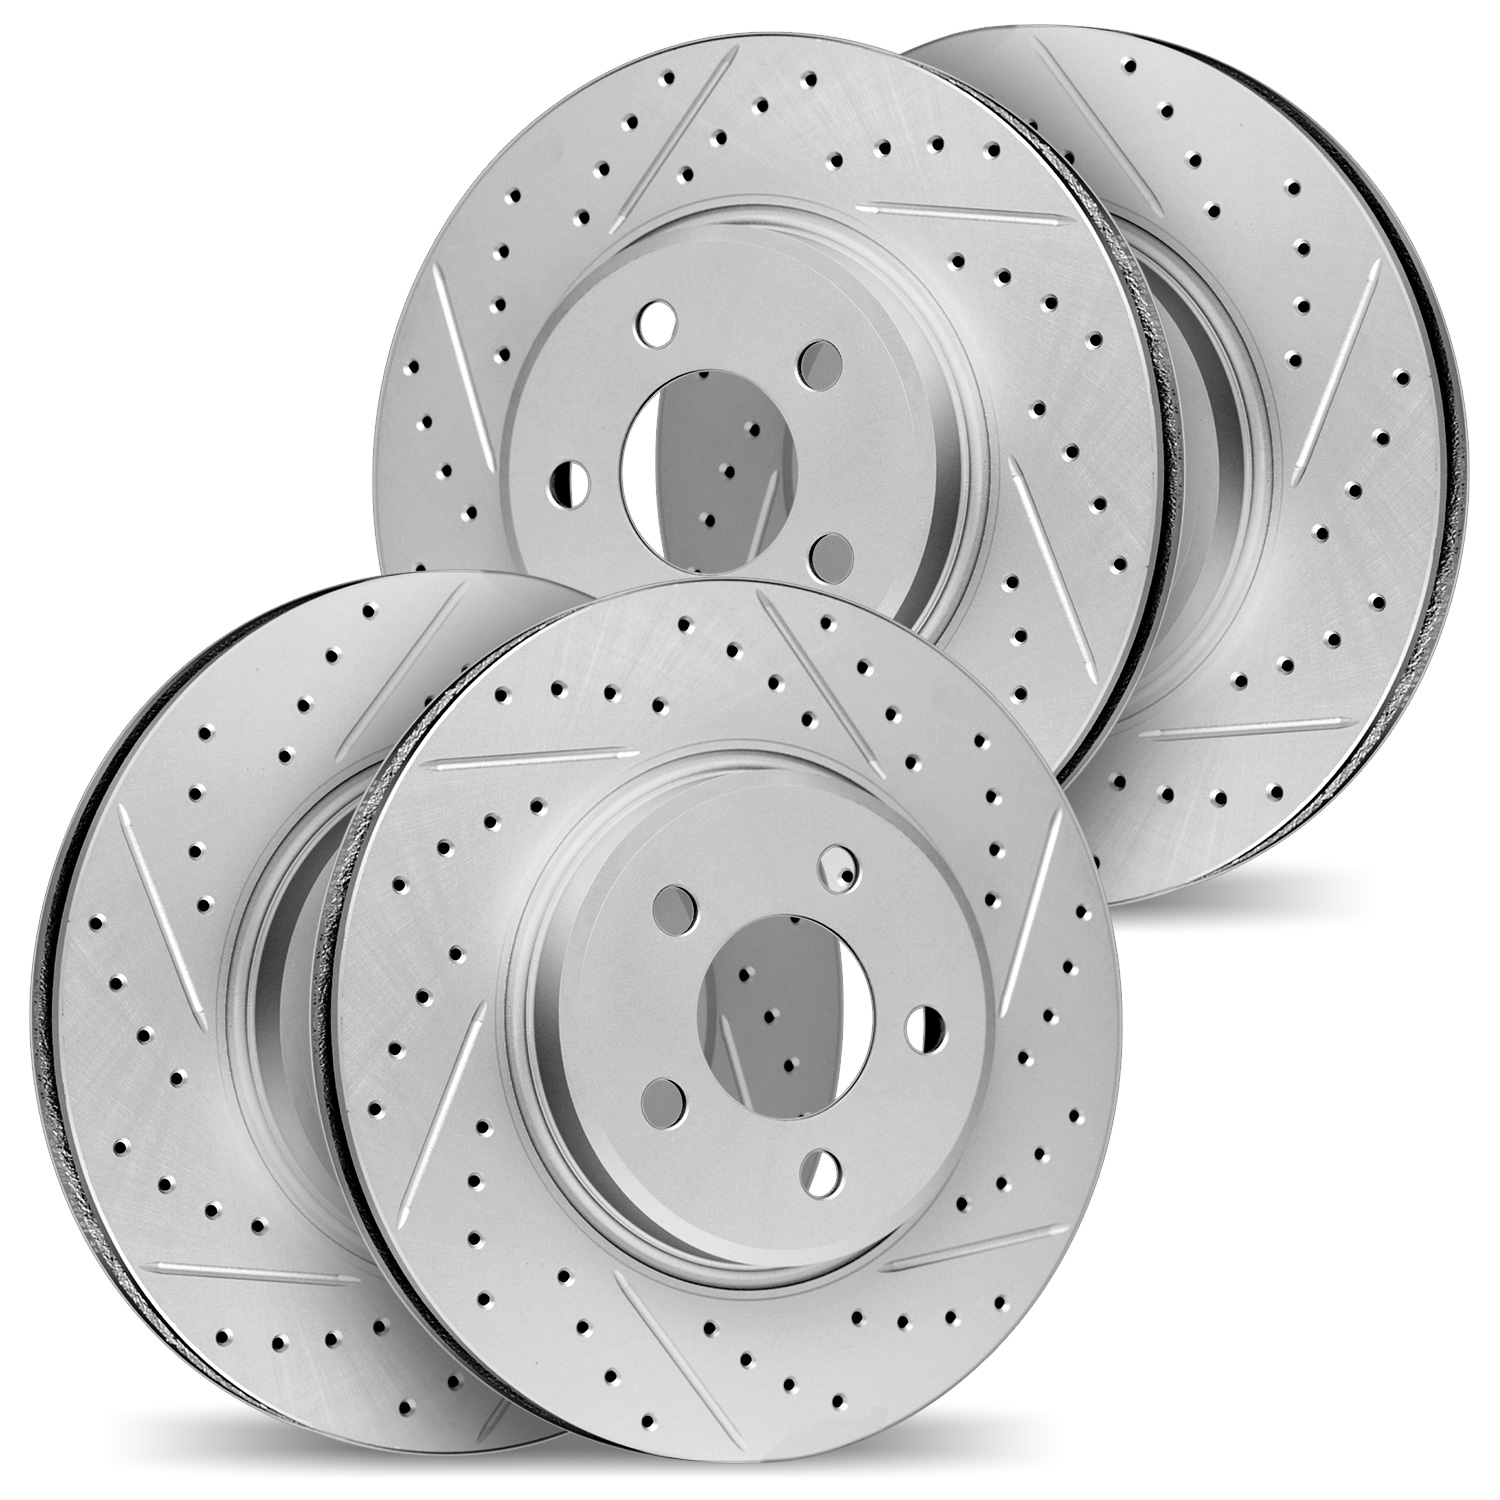 2004-11020 Geoperformance Drilled/Slotted Brake Rotors, Fits Select Land Rover, Position: Front and Rear